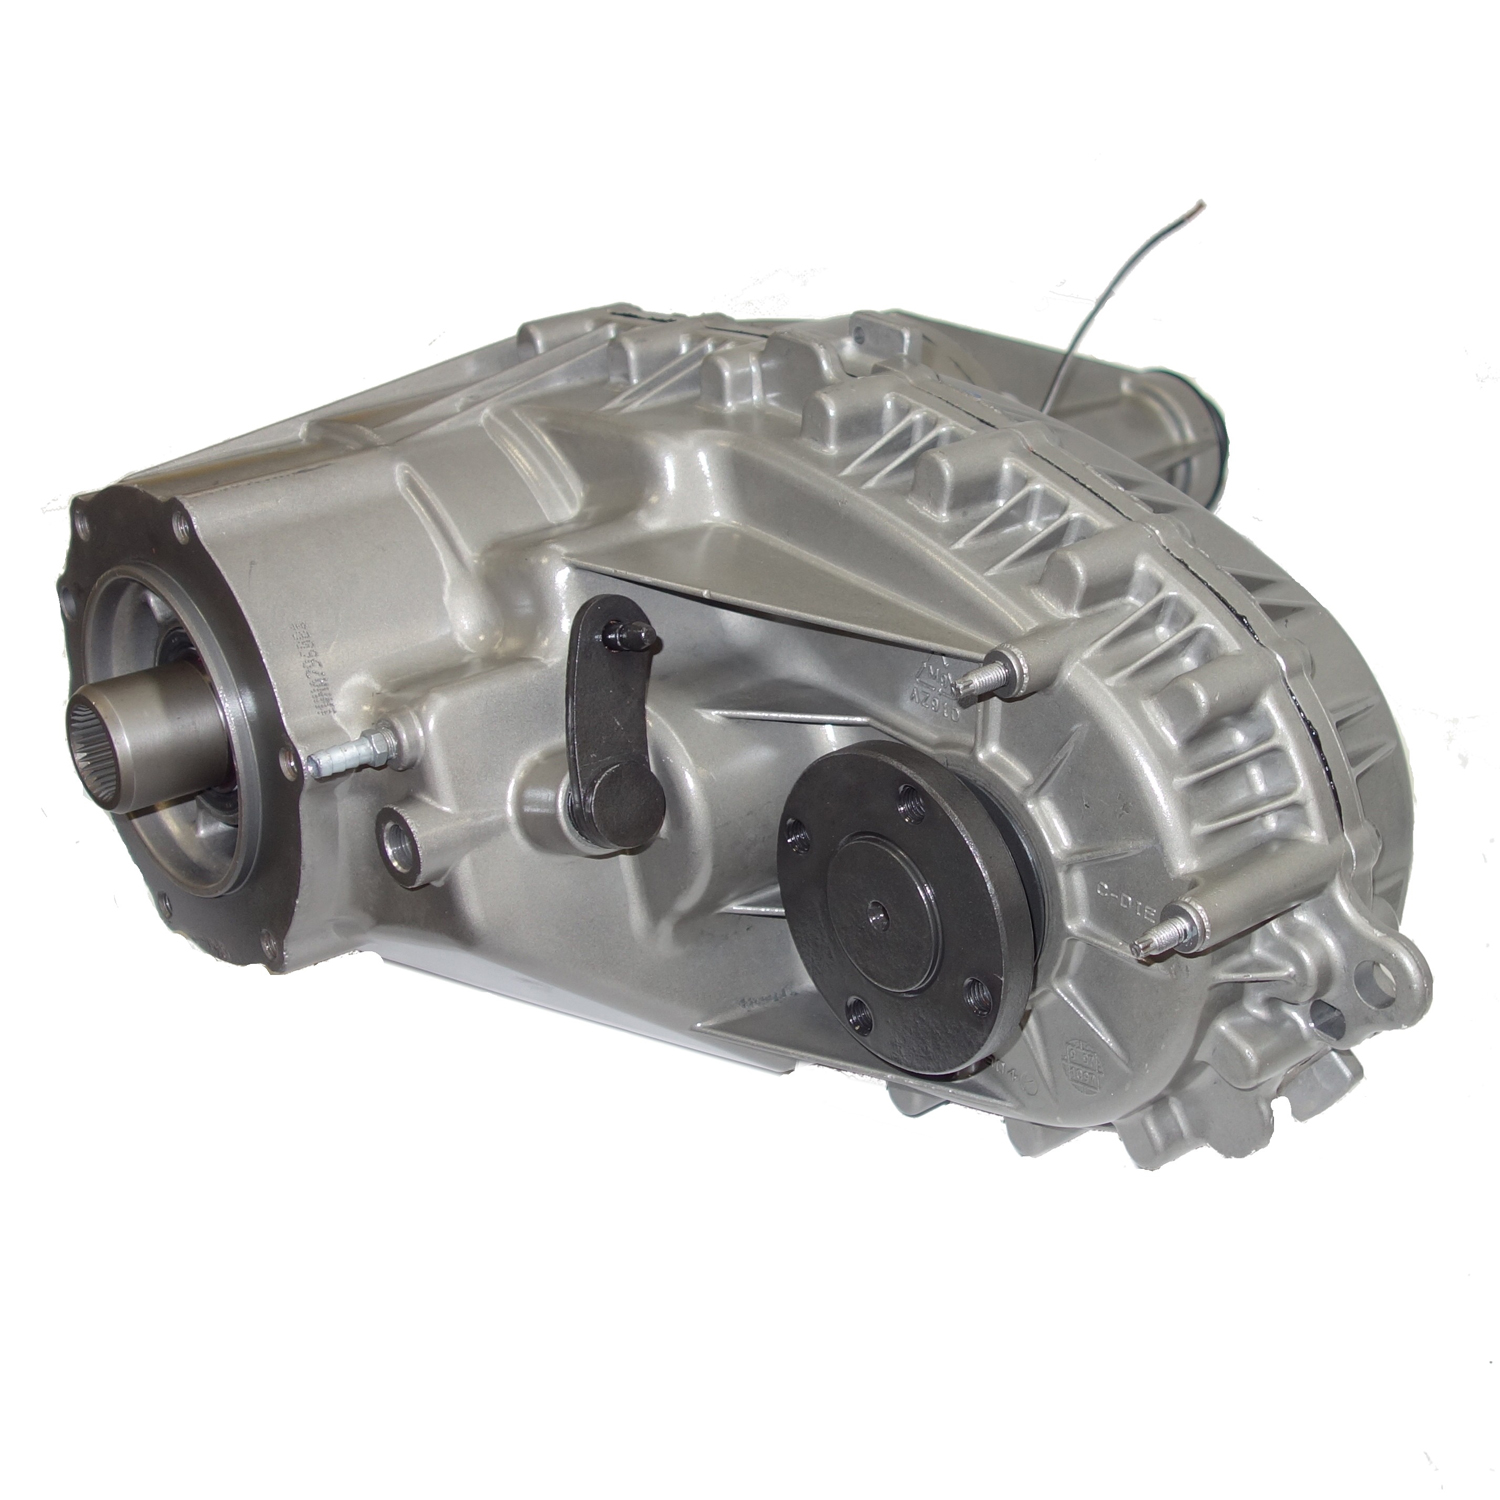 Remanufactured BW4406 Transfer Case for Ford 97-98 F150/F250/Expedition